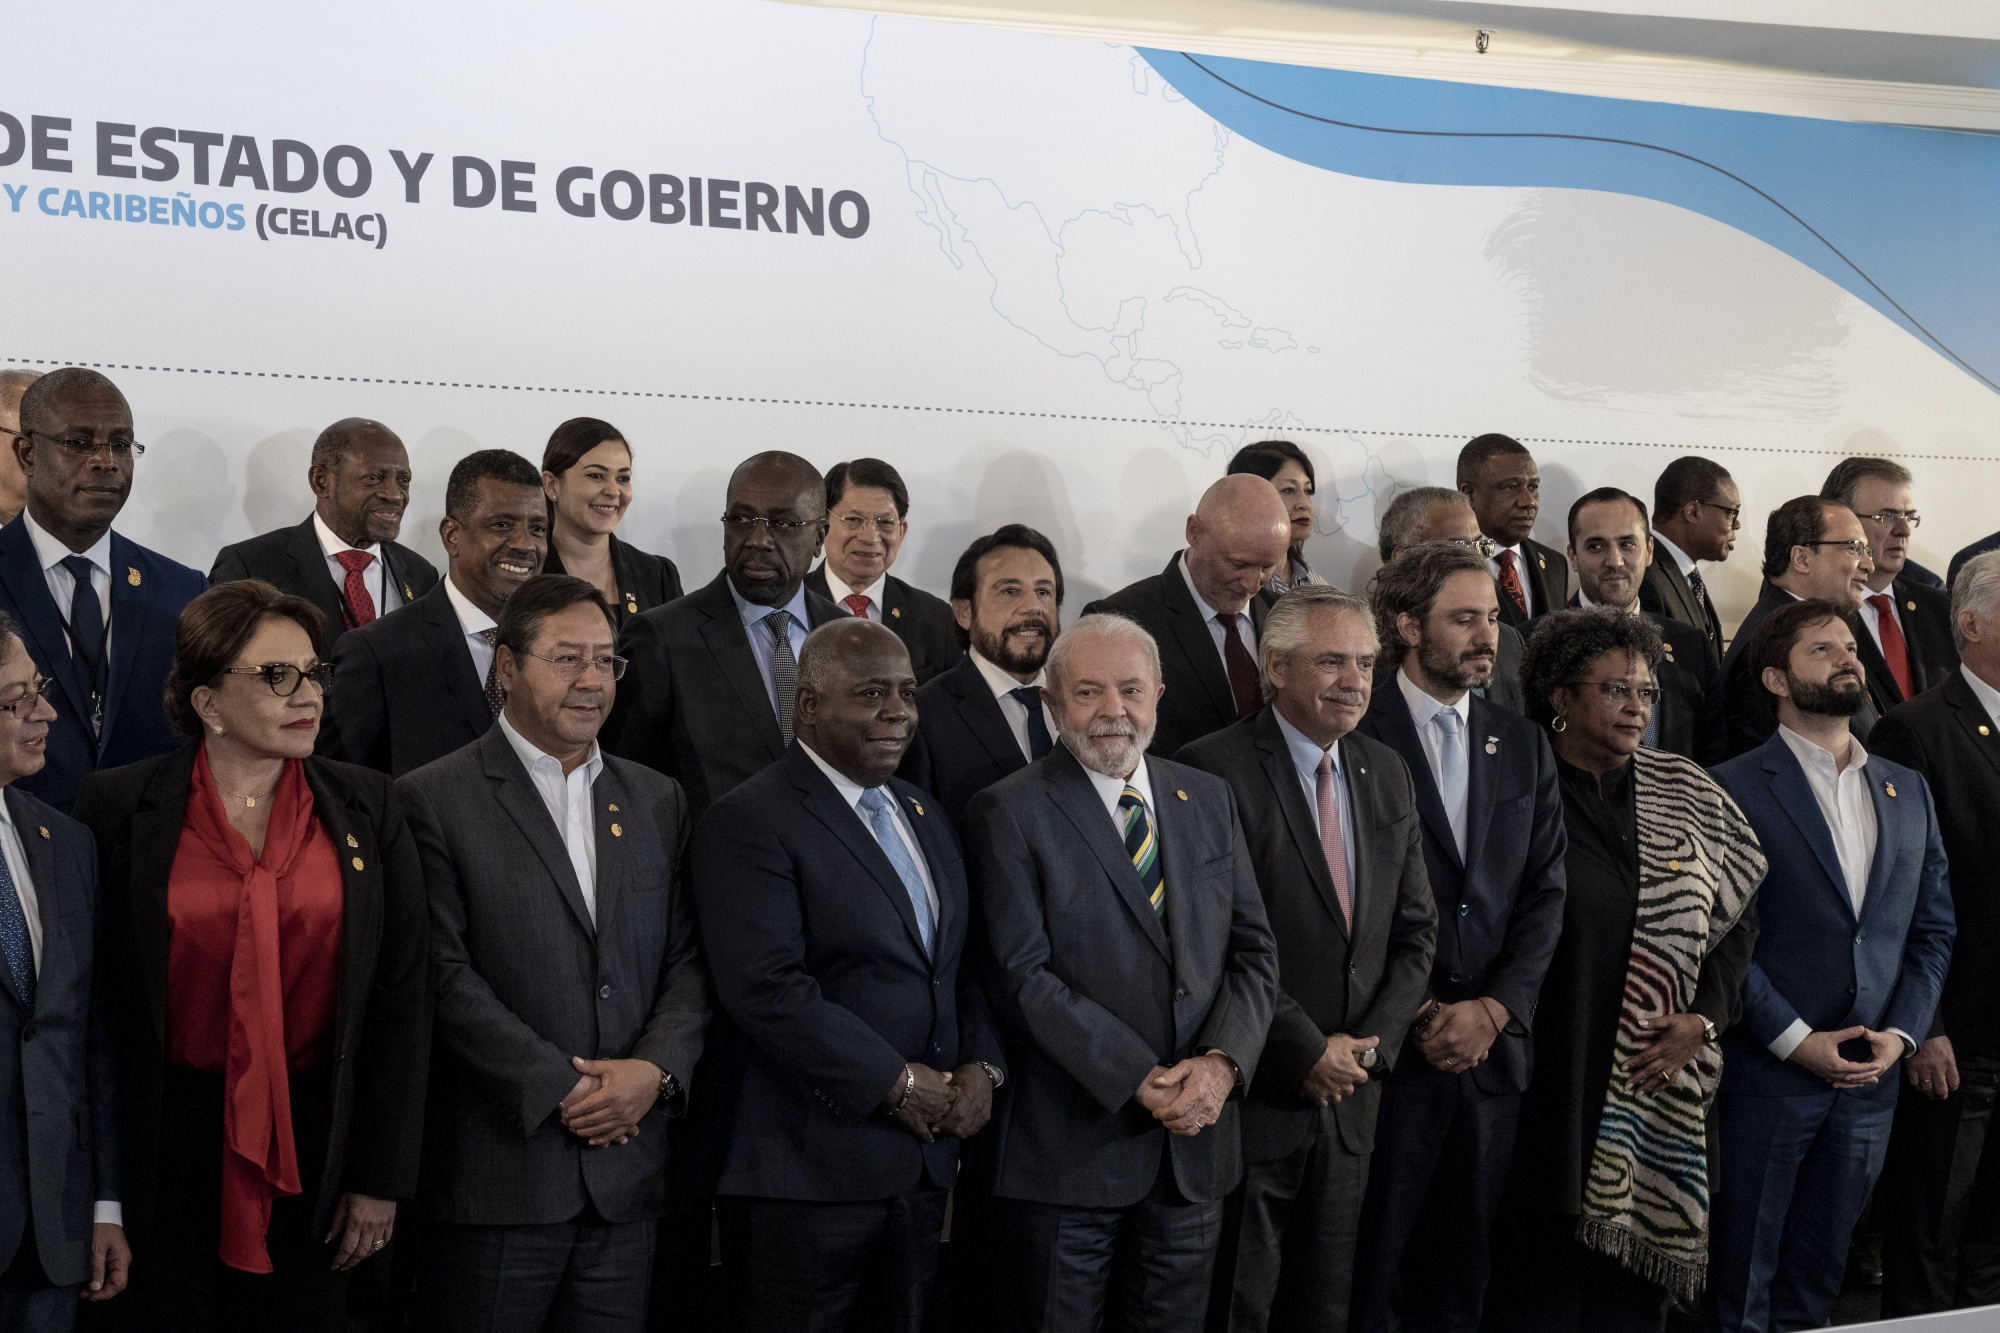 Movement leaders from across Latin America and the Caribbean met in Social  CELAC summit in Argentina : Peoples Dispatch